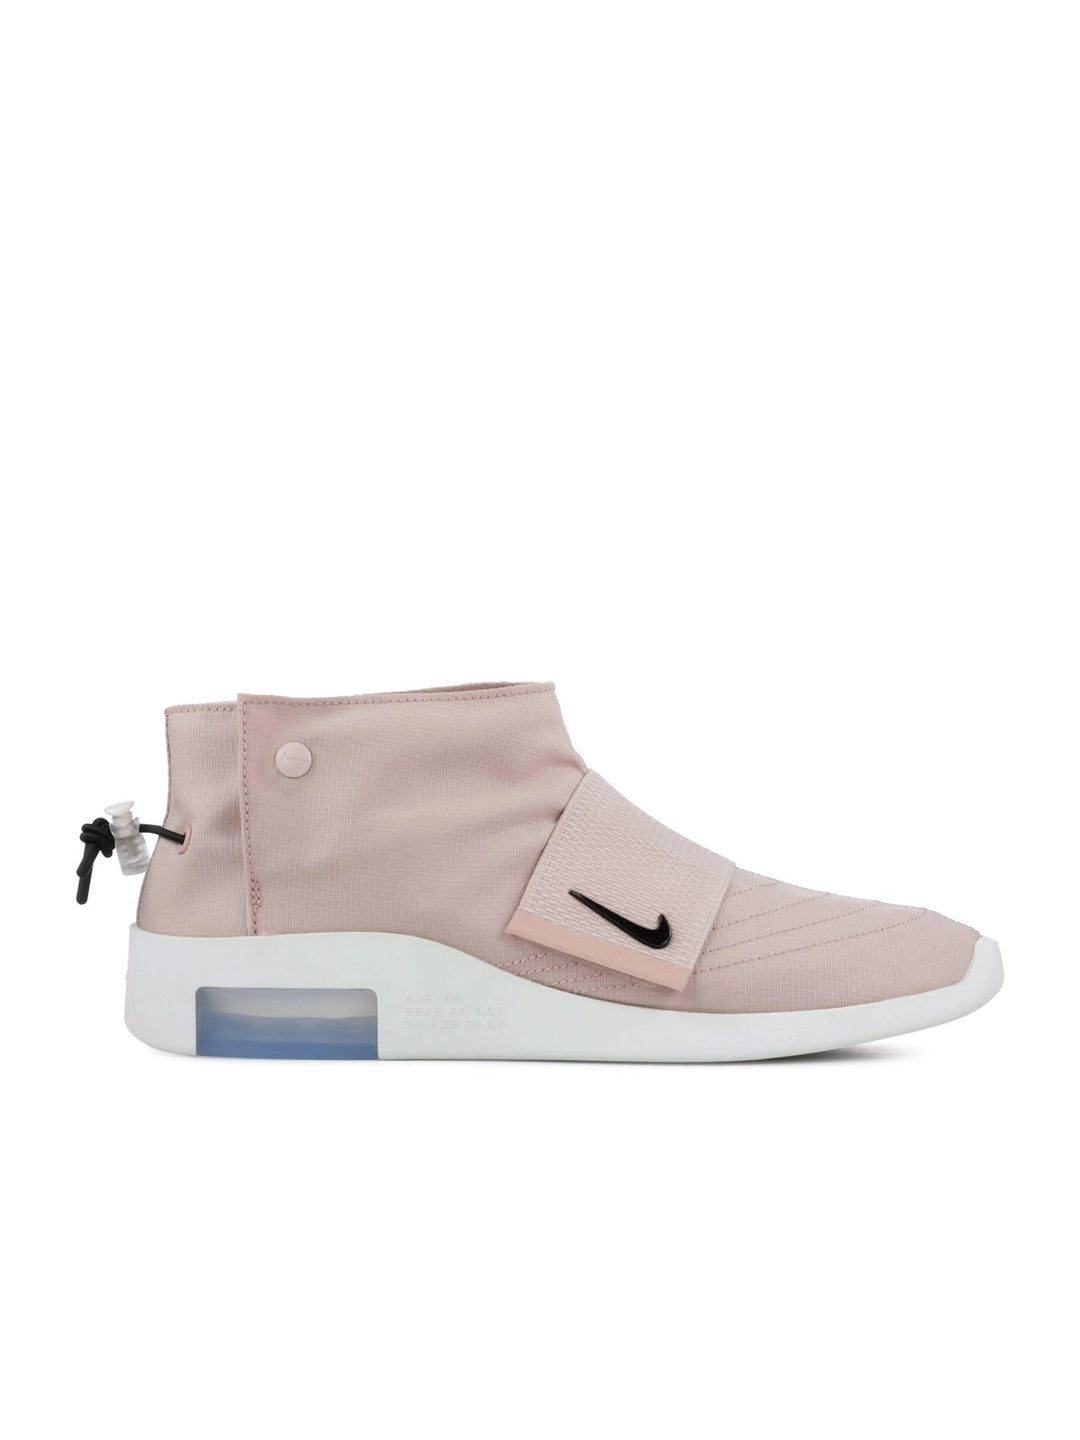 Nike Air Fear Of God Moccasin Particle Beige Nike